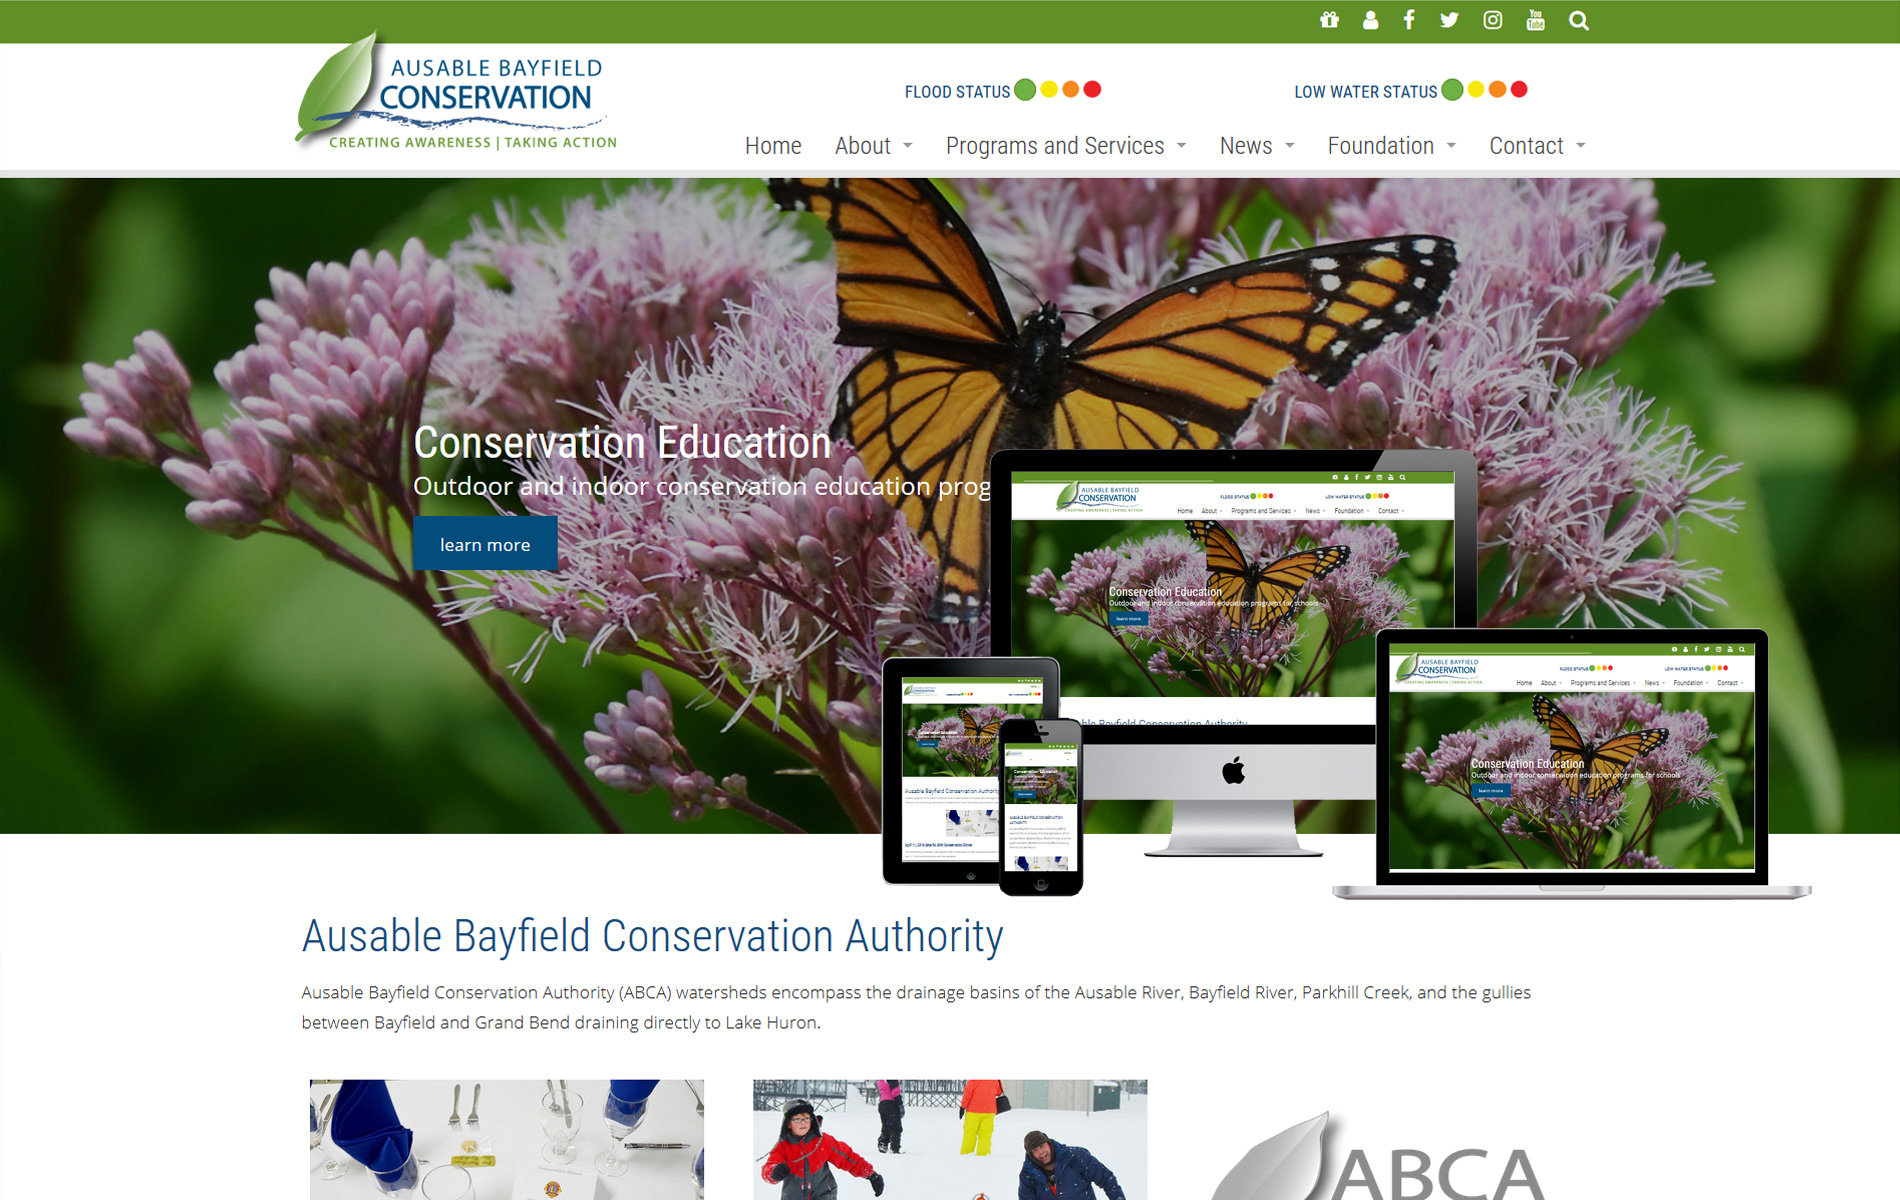 Ausable Bayfield Conservation Authority